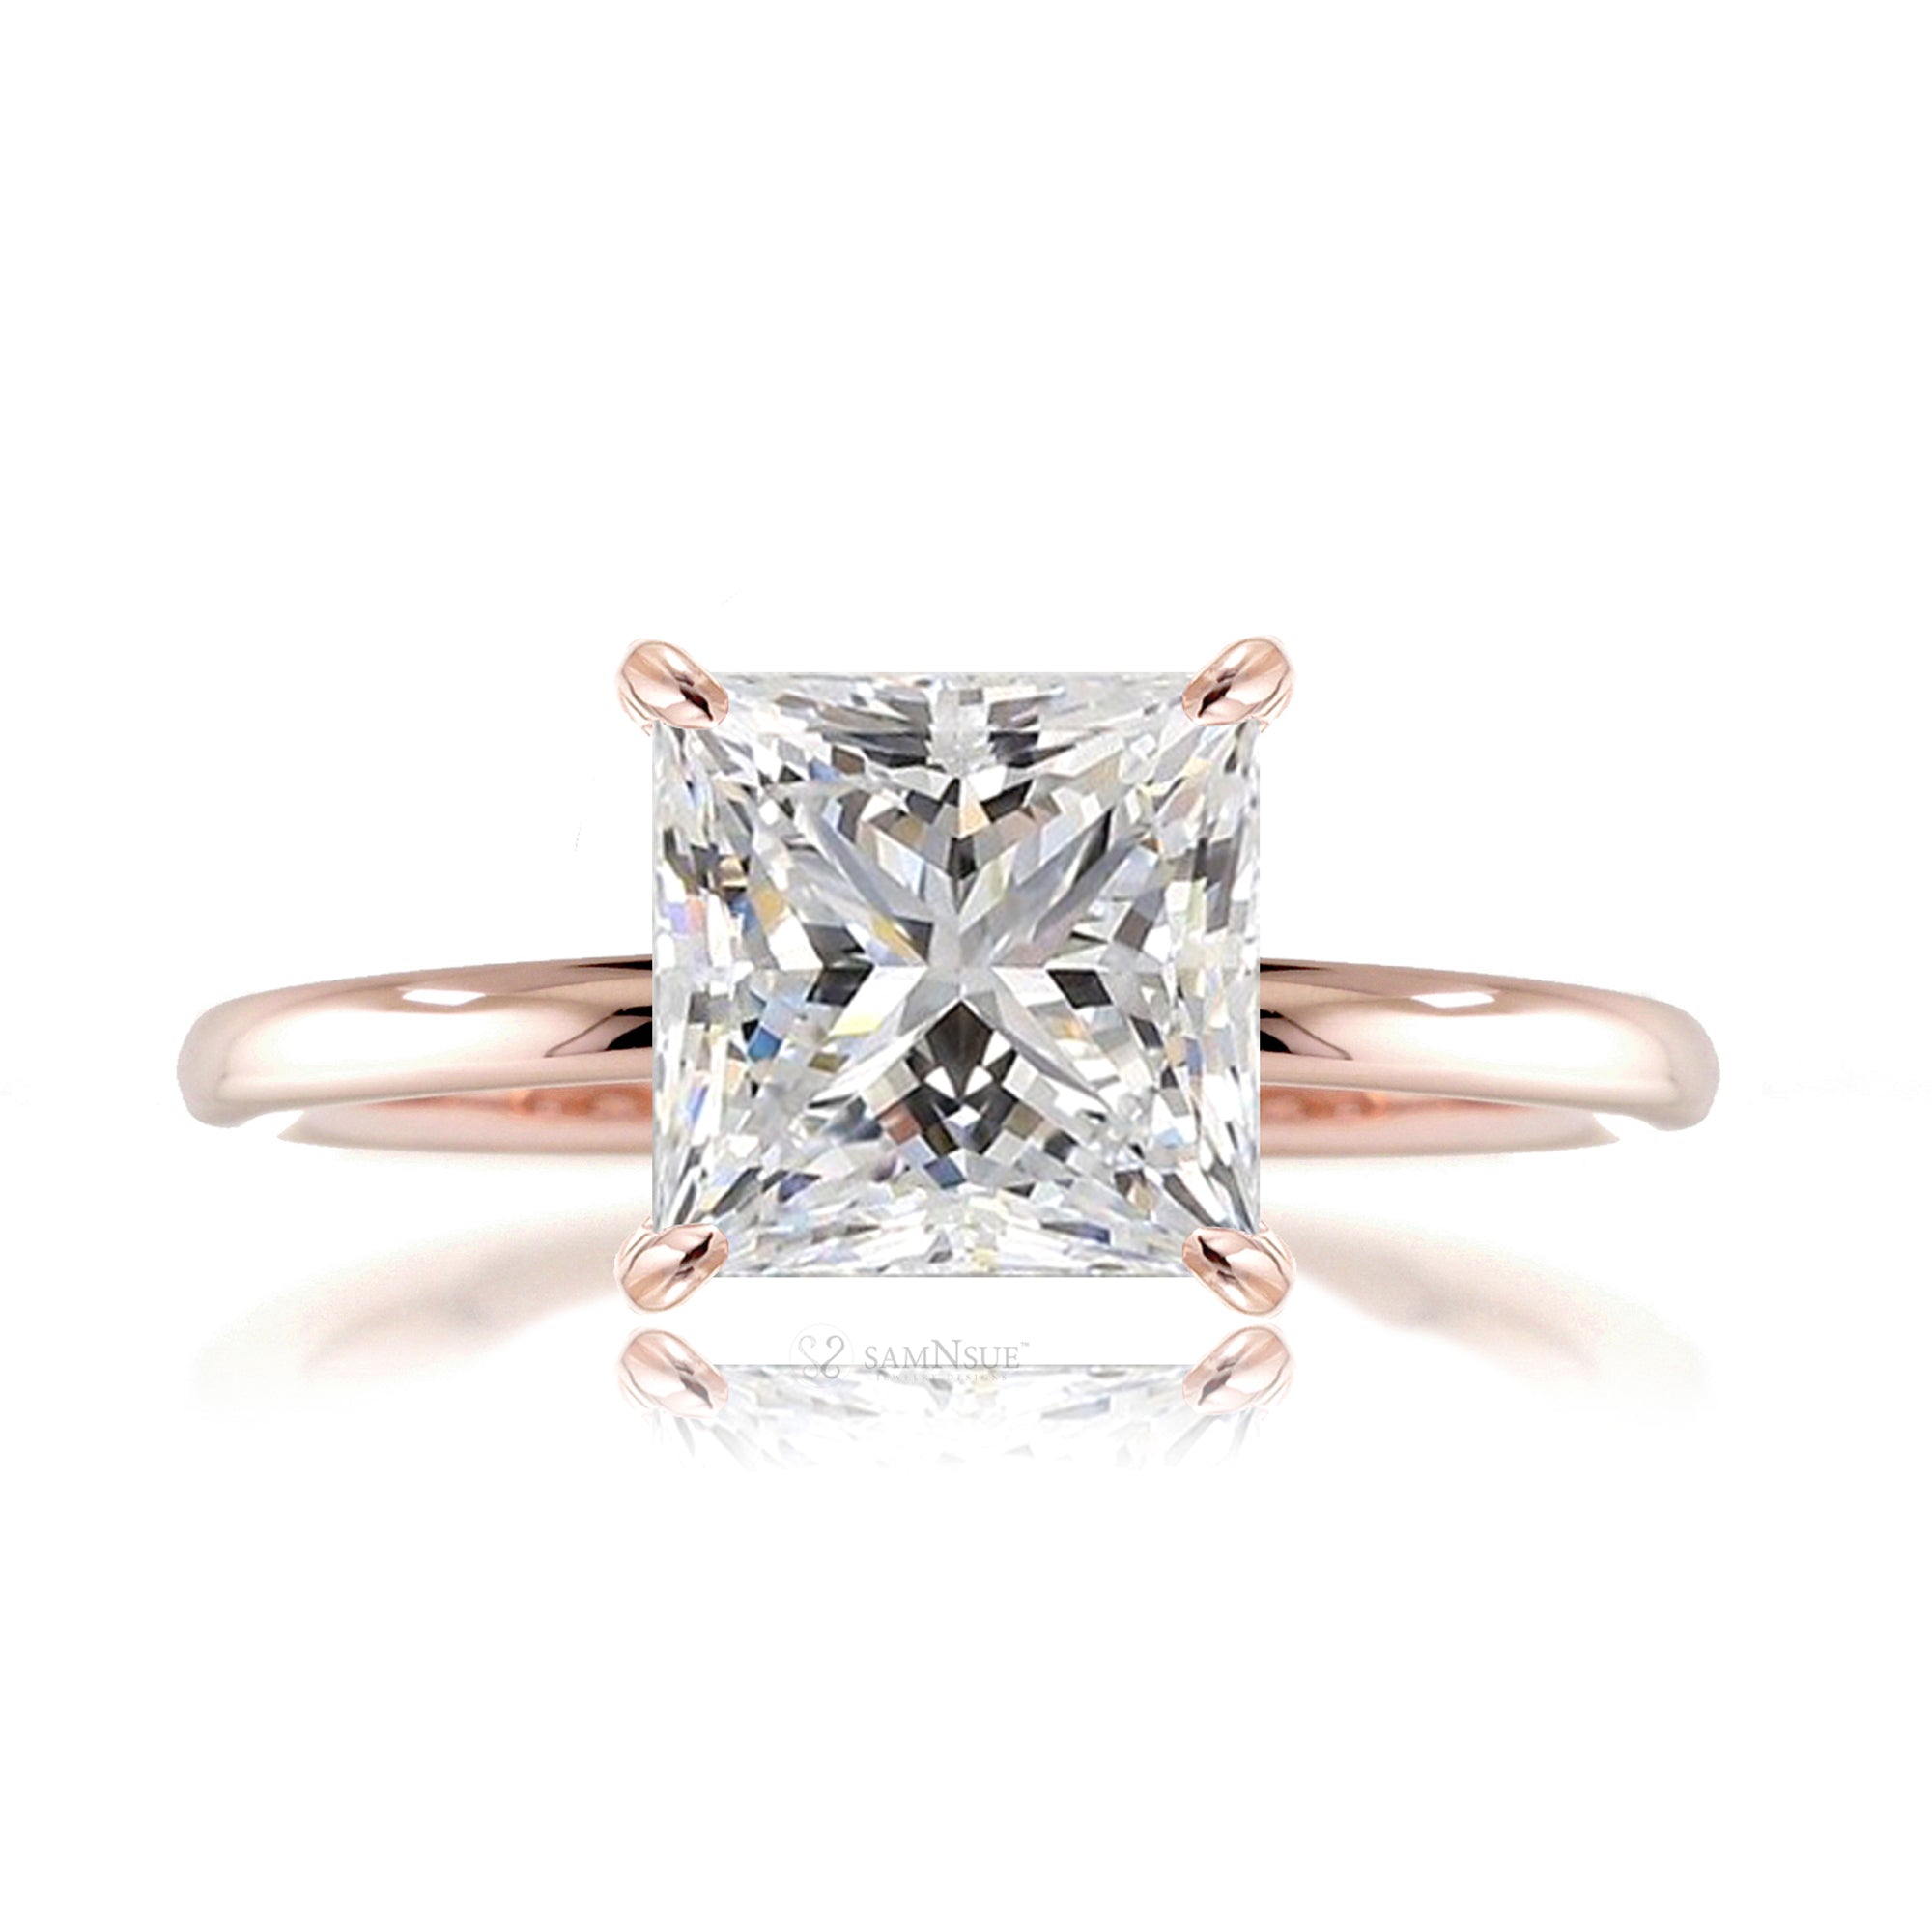 Princess cut lab-grown diamond engagement ring rose gold - The Ava solid band